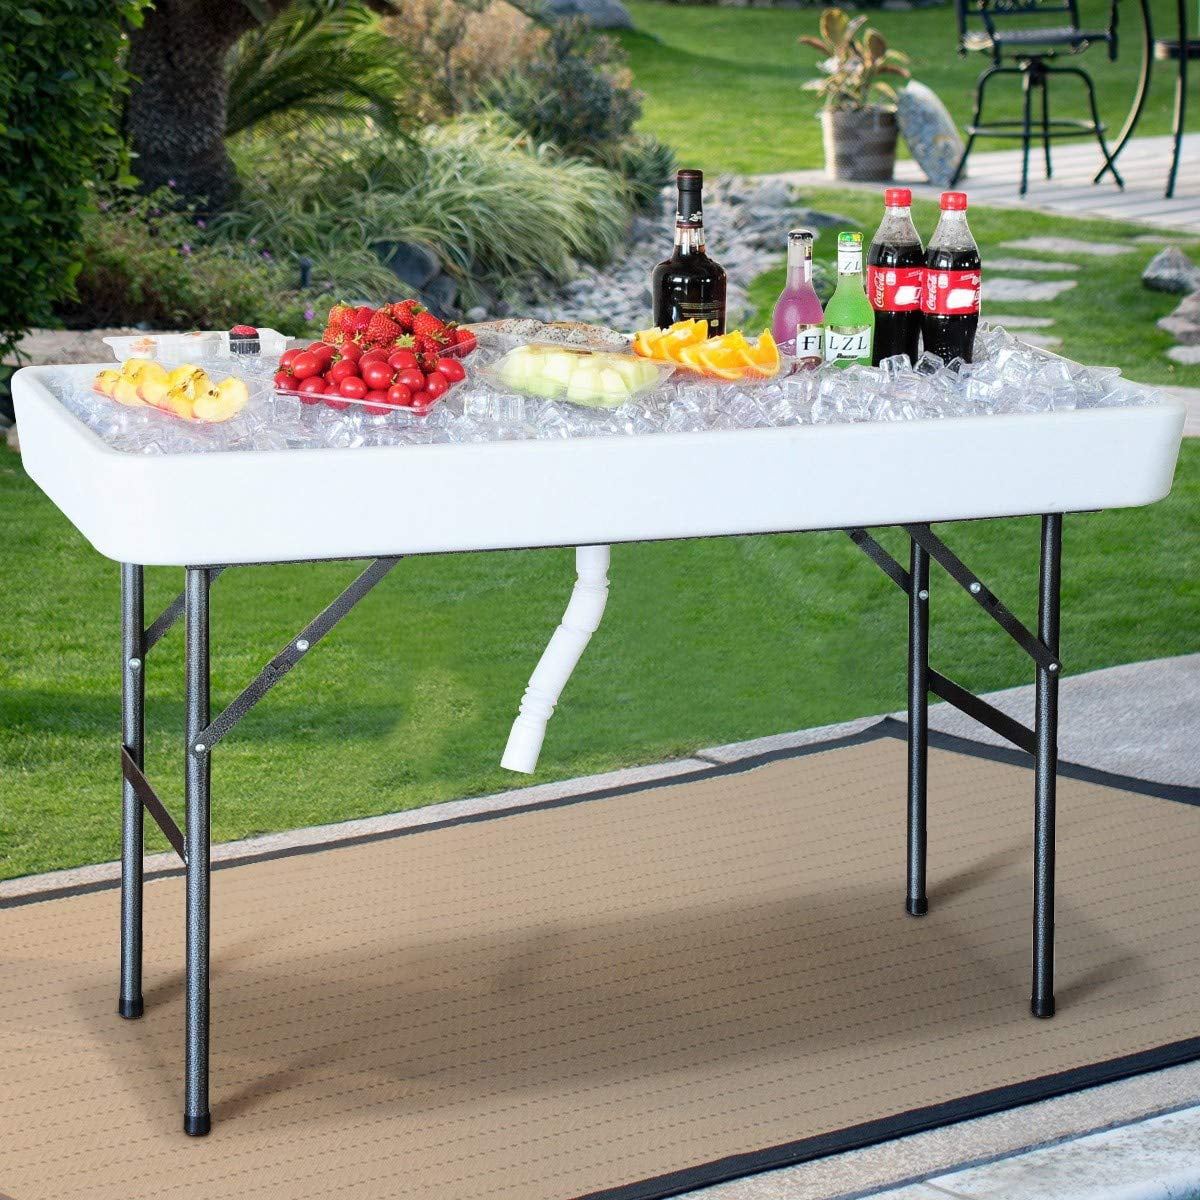 COSTWAY 4FT 1.2M Camping Cooler Table Folding Cool Bar Ice Table with Skirt Cover and Water Pipe for BBQ Picnic Party Outdoor Garden Furniture